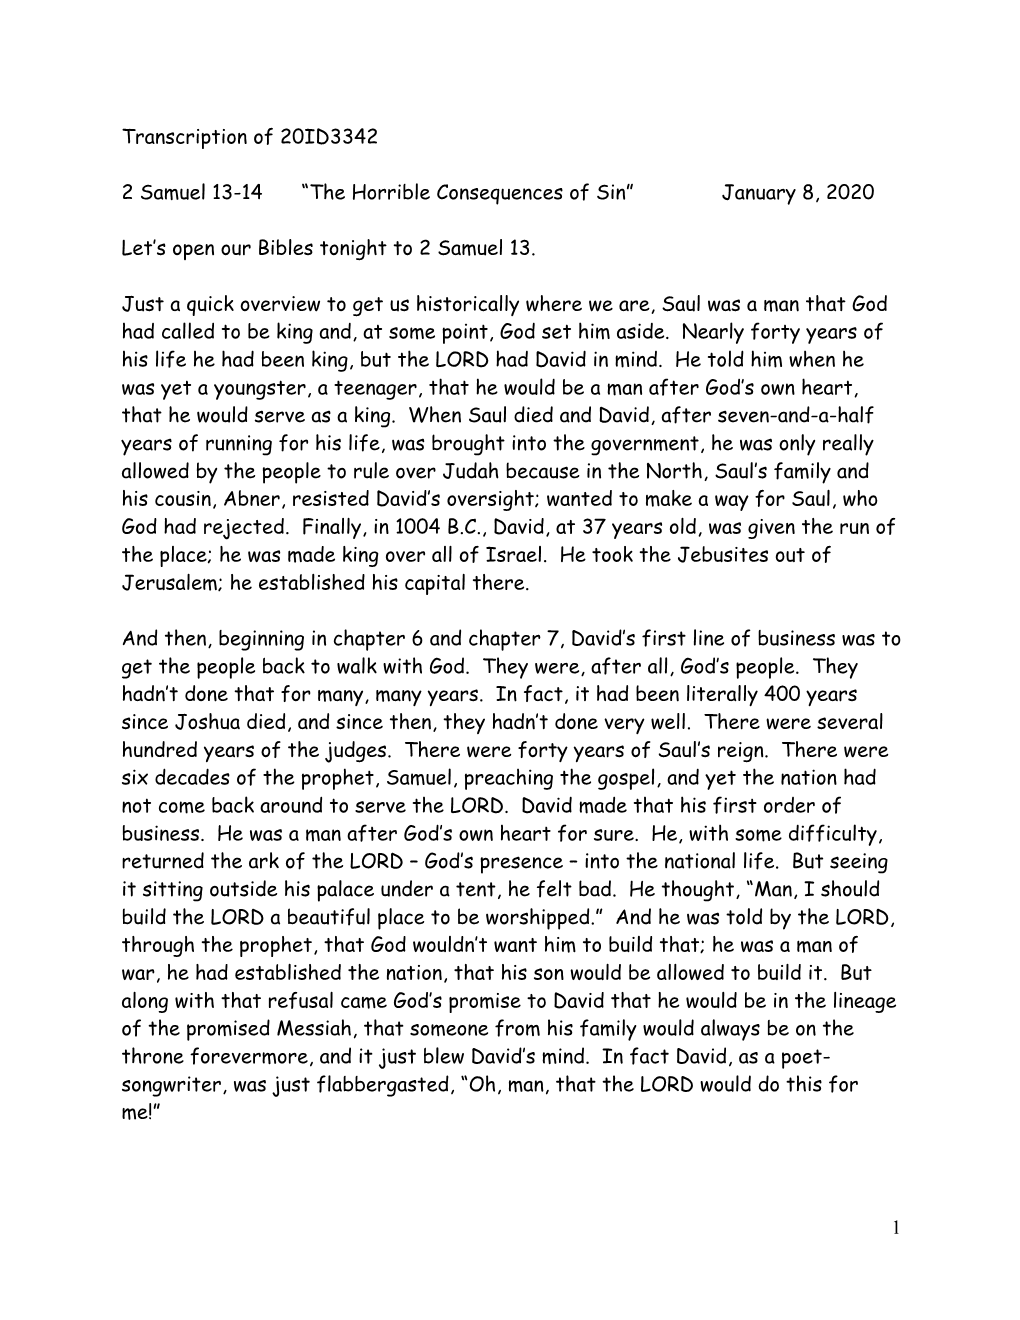 1 Transcription of 20ID3342 2 Samuel 13-14 “The Horrible Consequences of Sin”